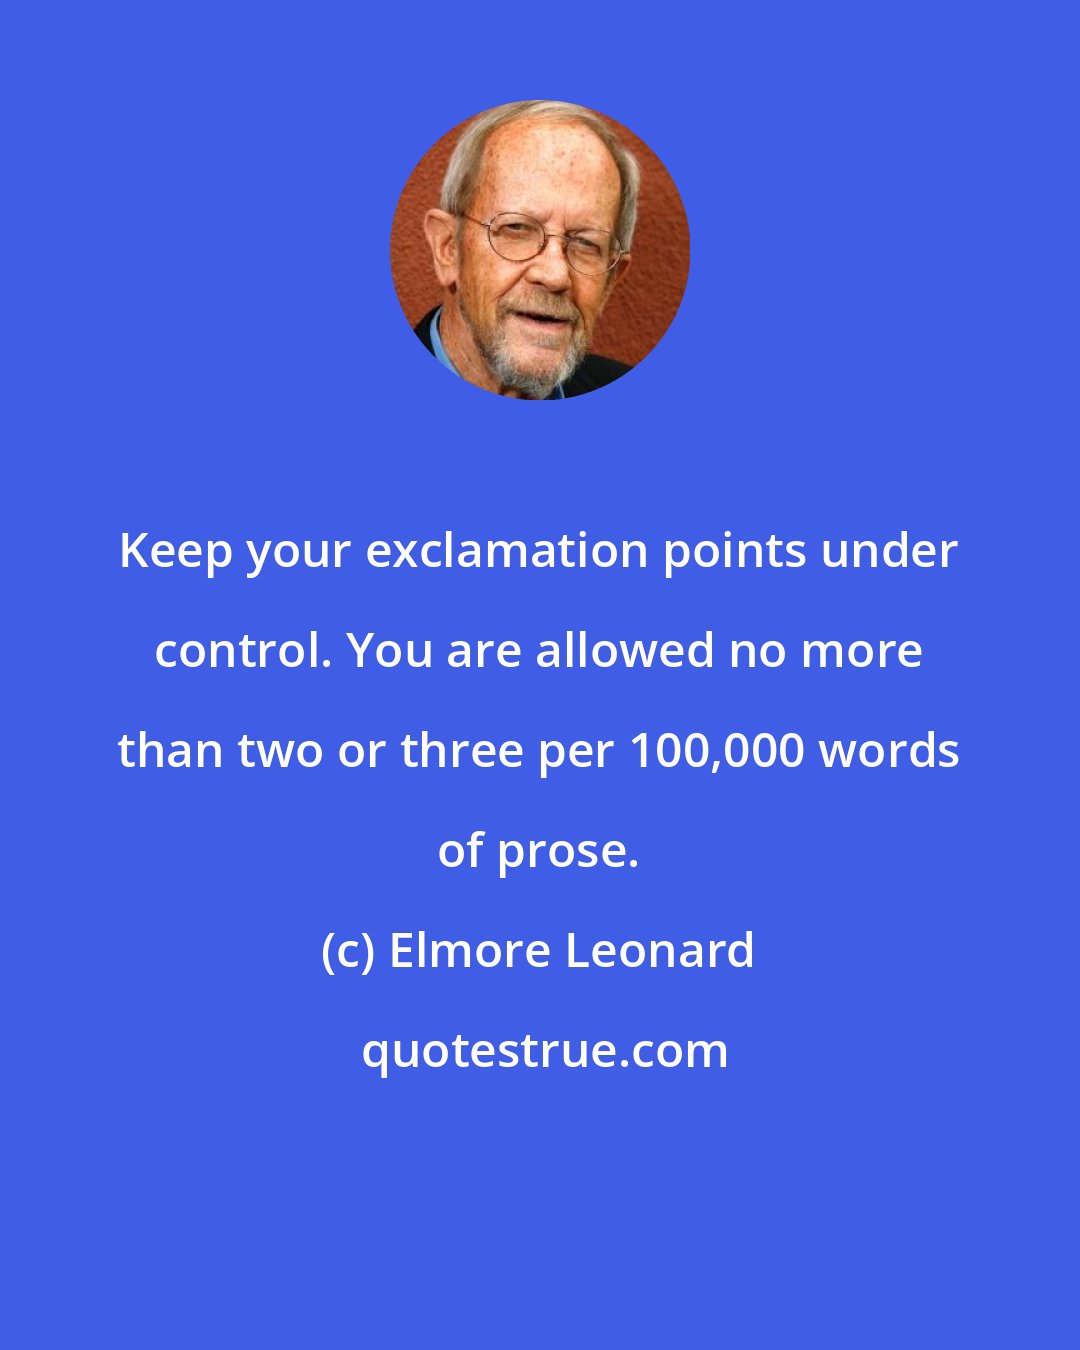 Elmore Leonard: Keep your exclamation points under control. You are allowed no more than two or three per 100,000 words of prose.